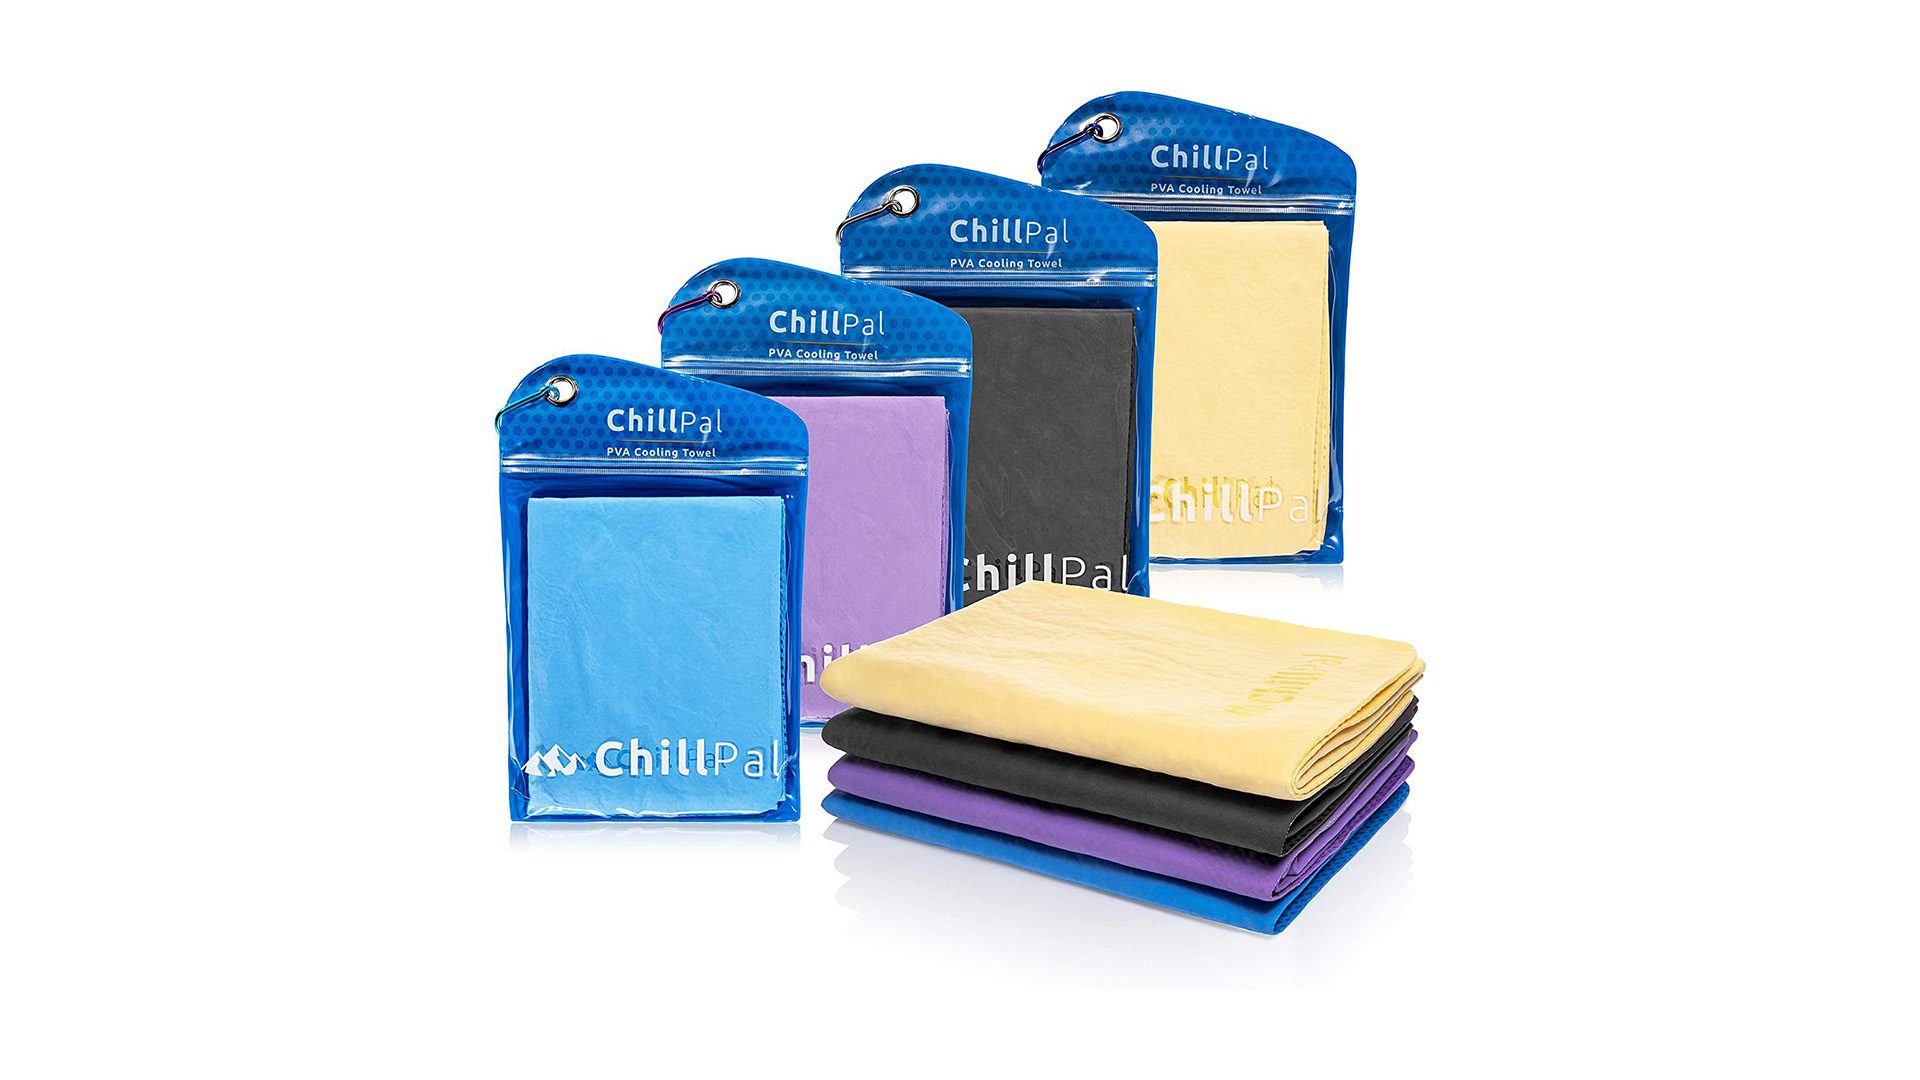 Chill Pal's PVA Cooling Towel